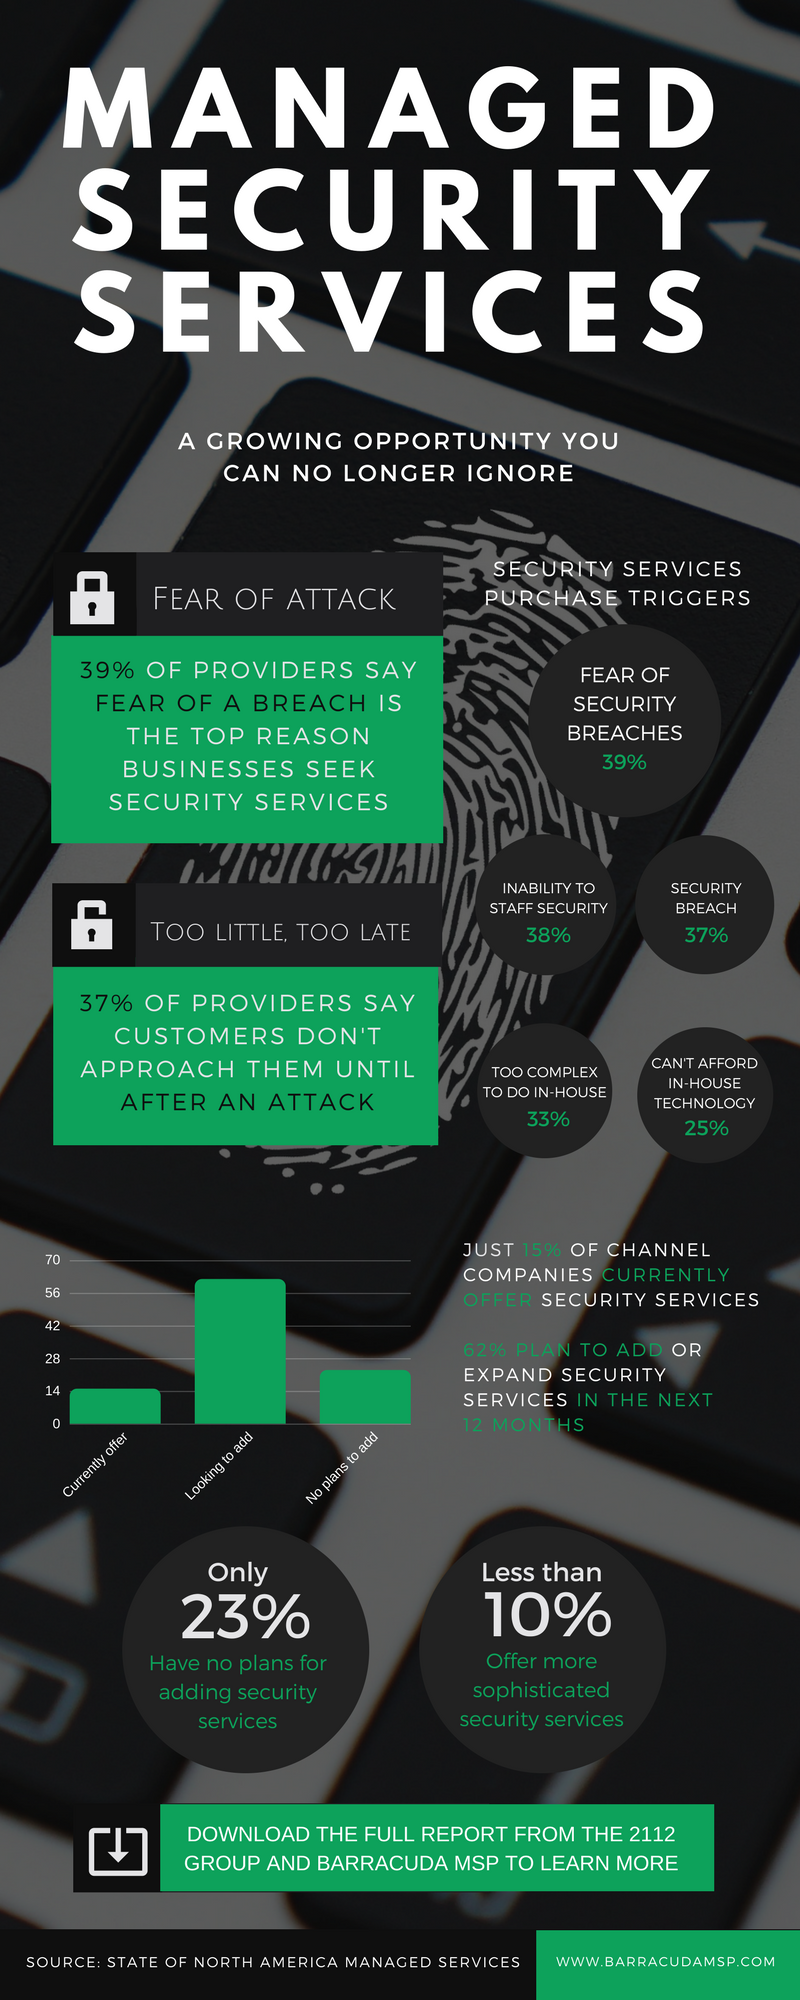 Managed Security Services Infographic